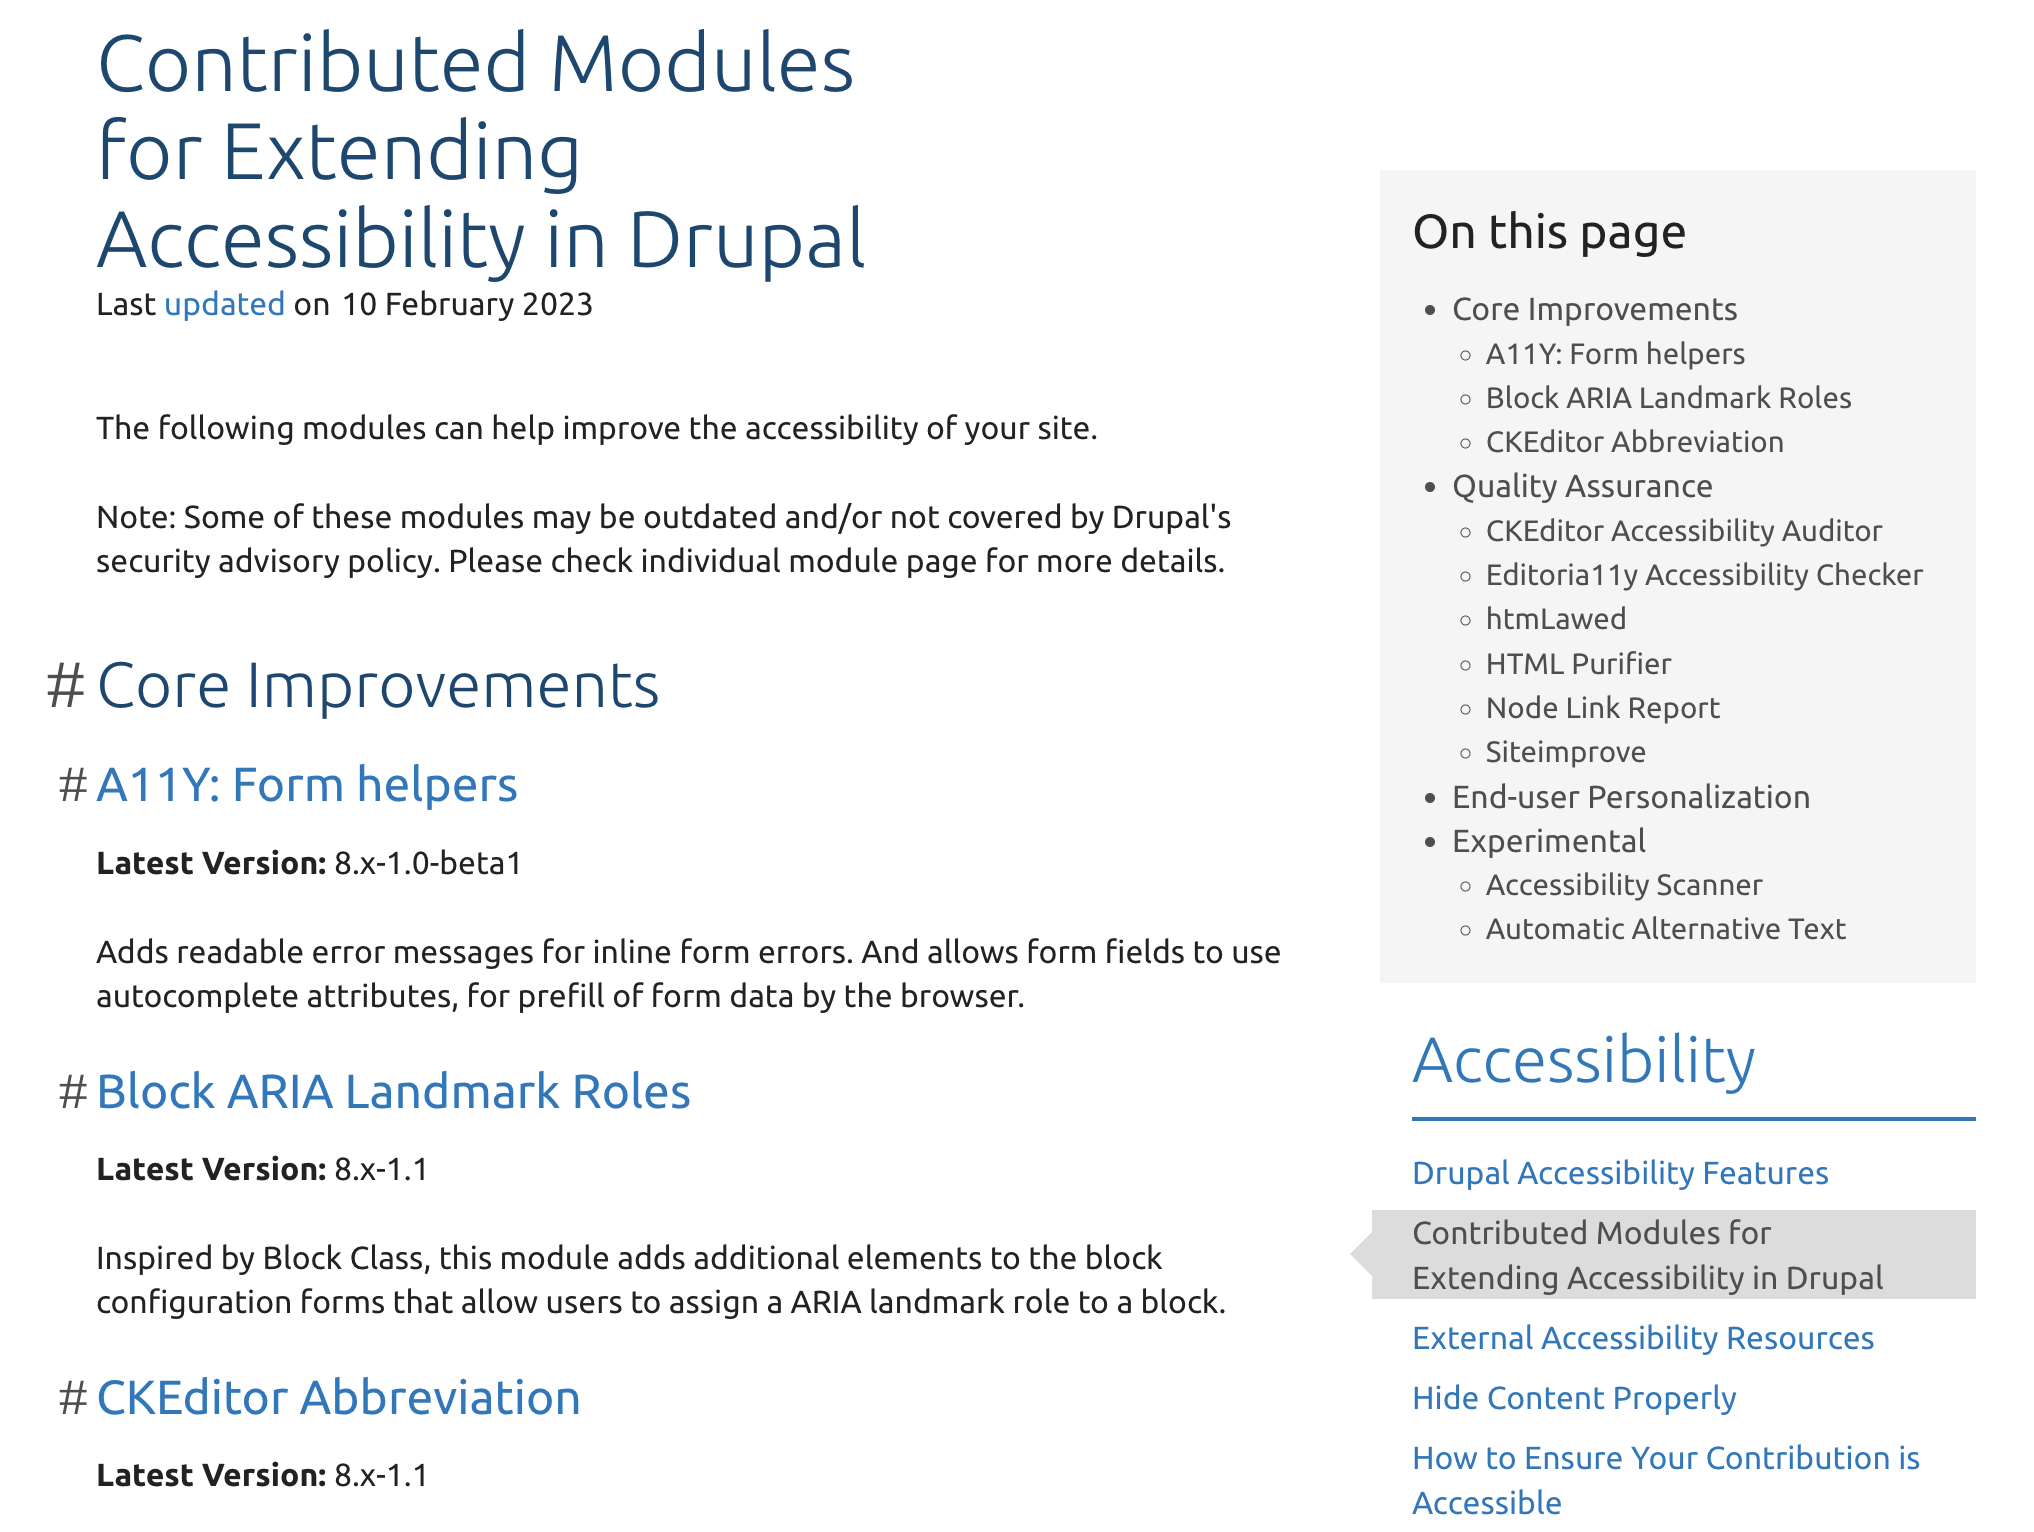 Screenshot of Drupal webpage with title 'Contributed Modules for Extending Accessibility in Drupal'